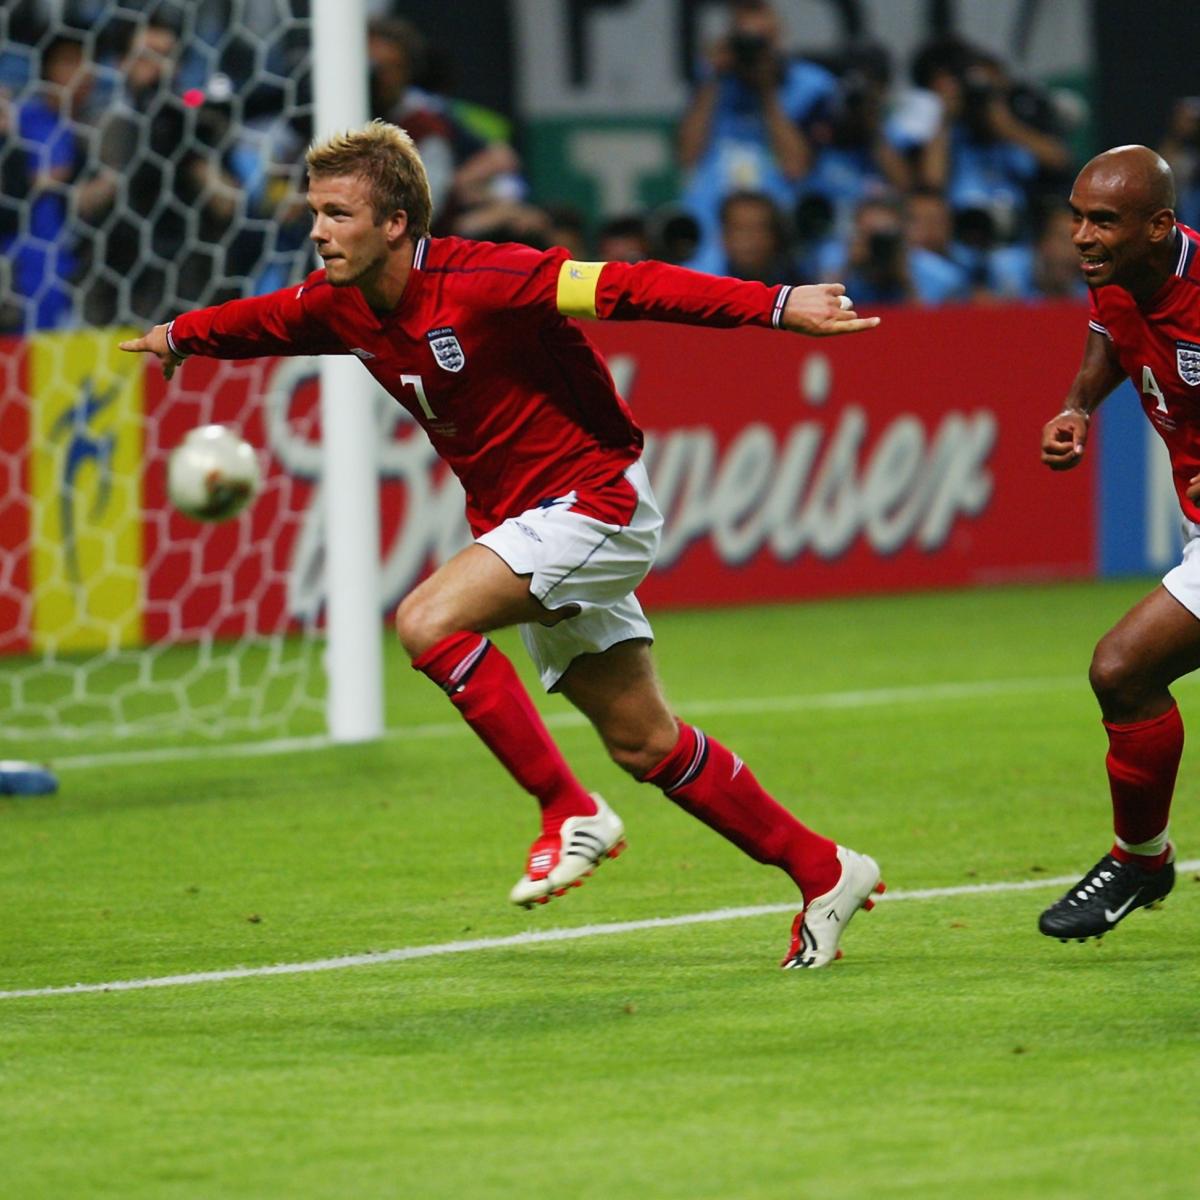 10 Most Iconic World Cup Goals and the Stories Behind Them